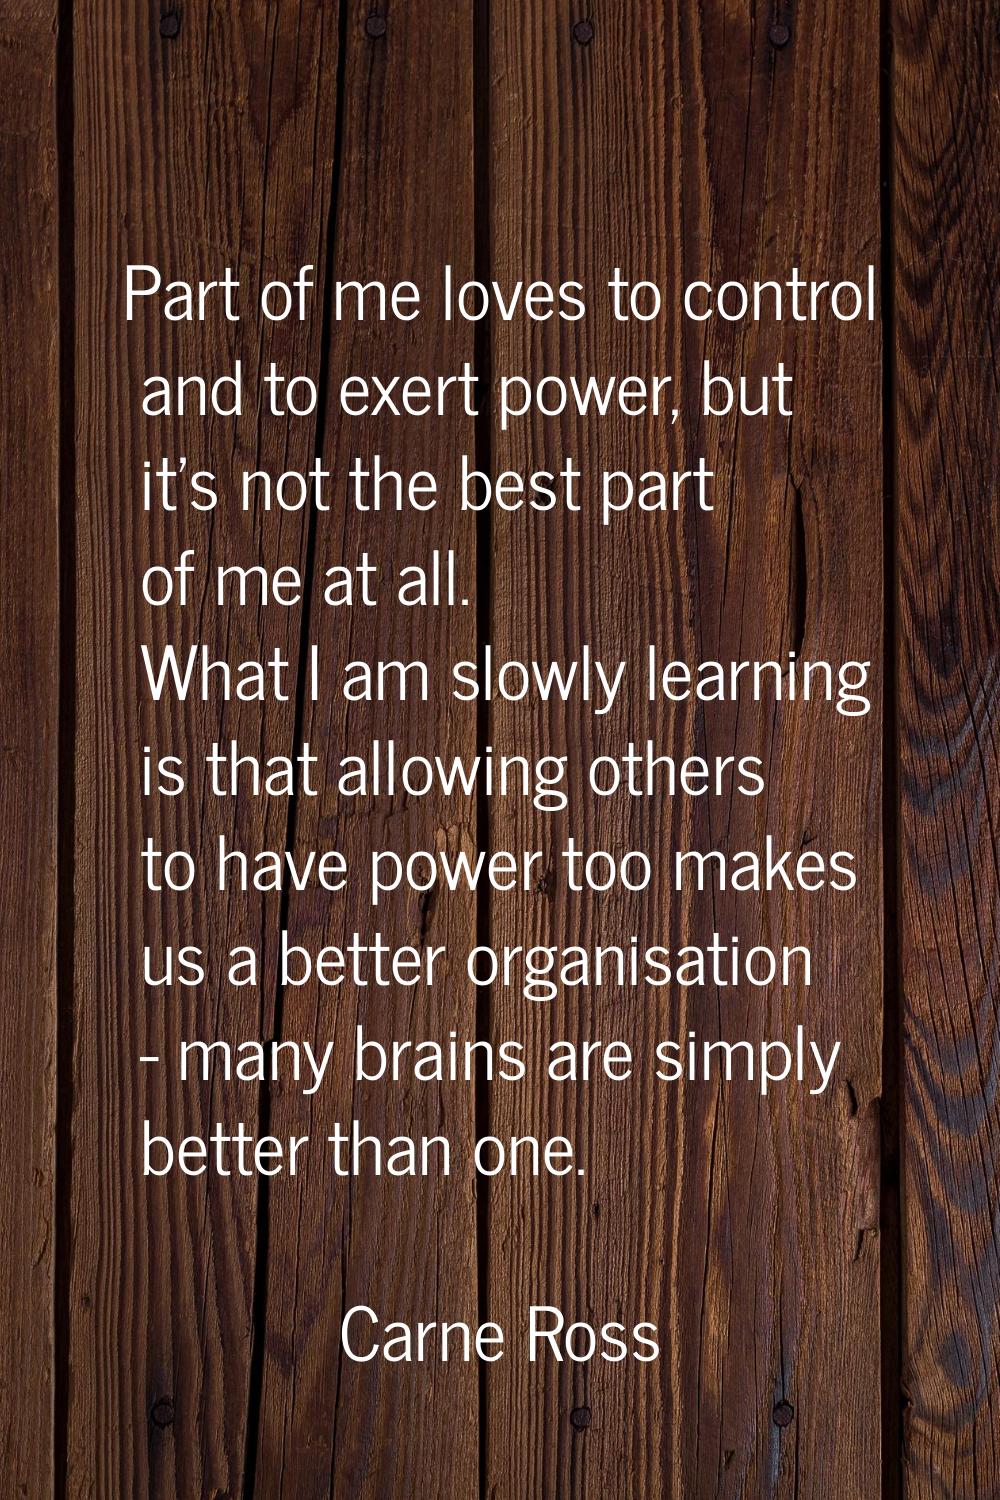 Part of me loves to control and to exert power, but it's not the best part of me at all. What I am 